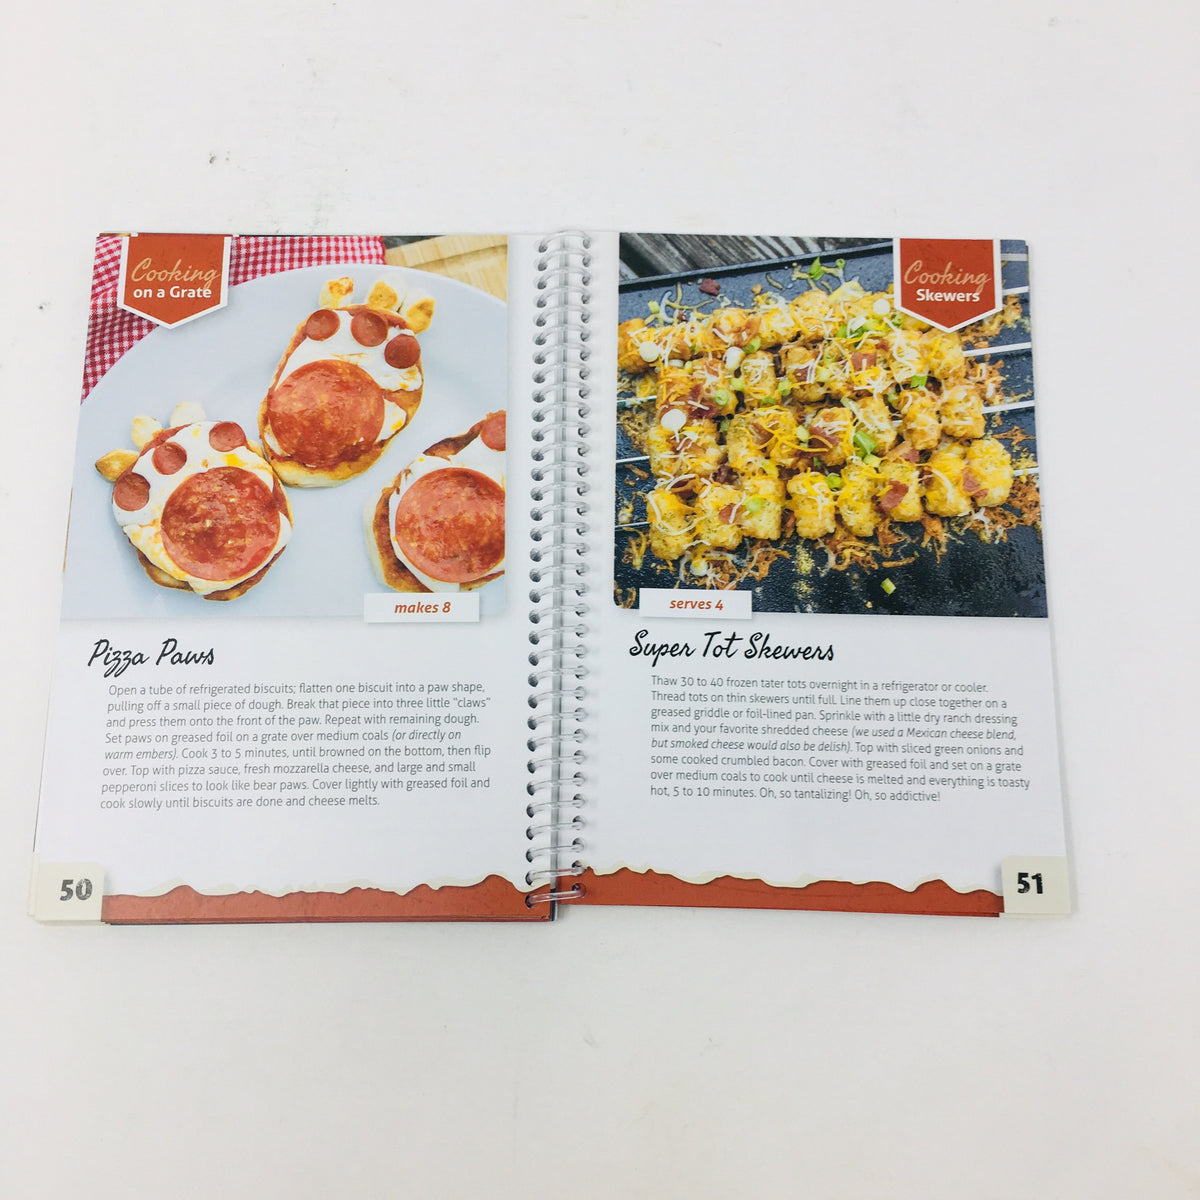 interior pages of cookbook showing recipes